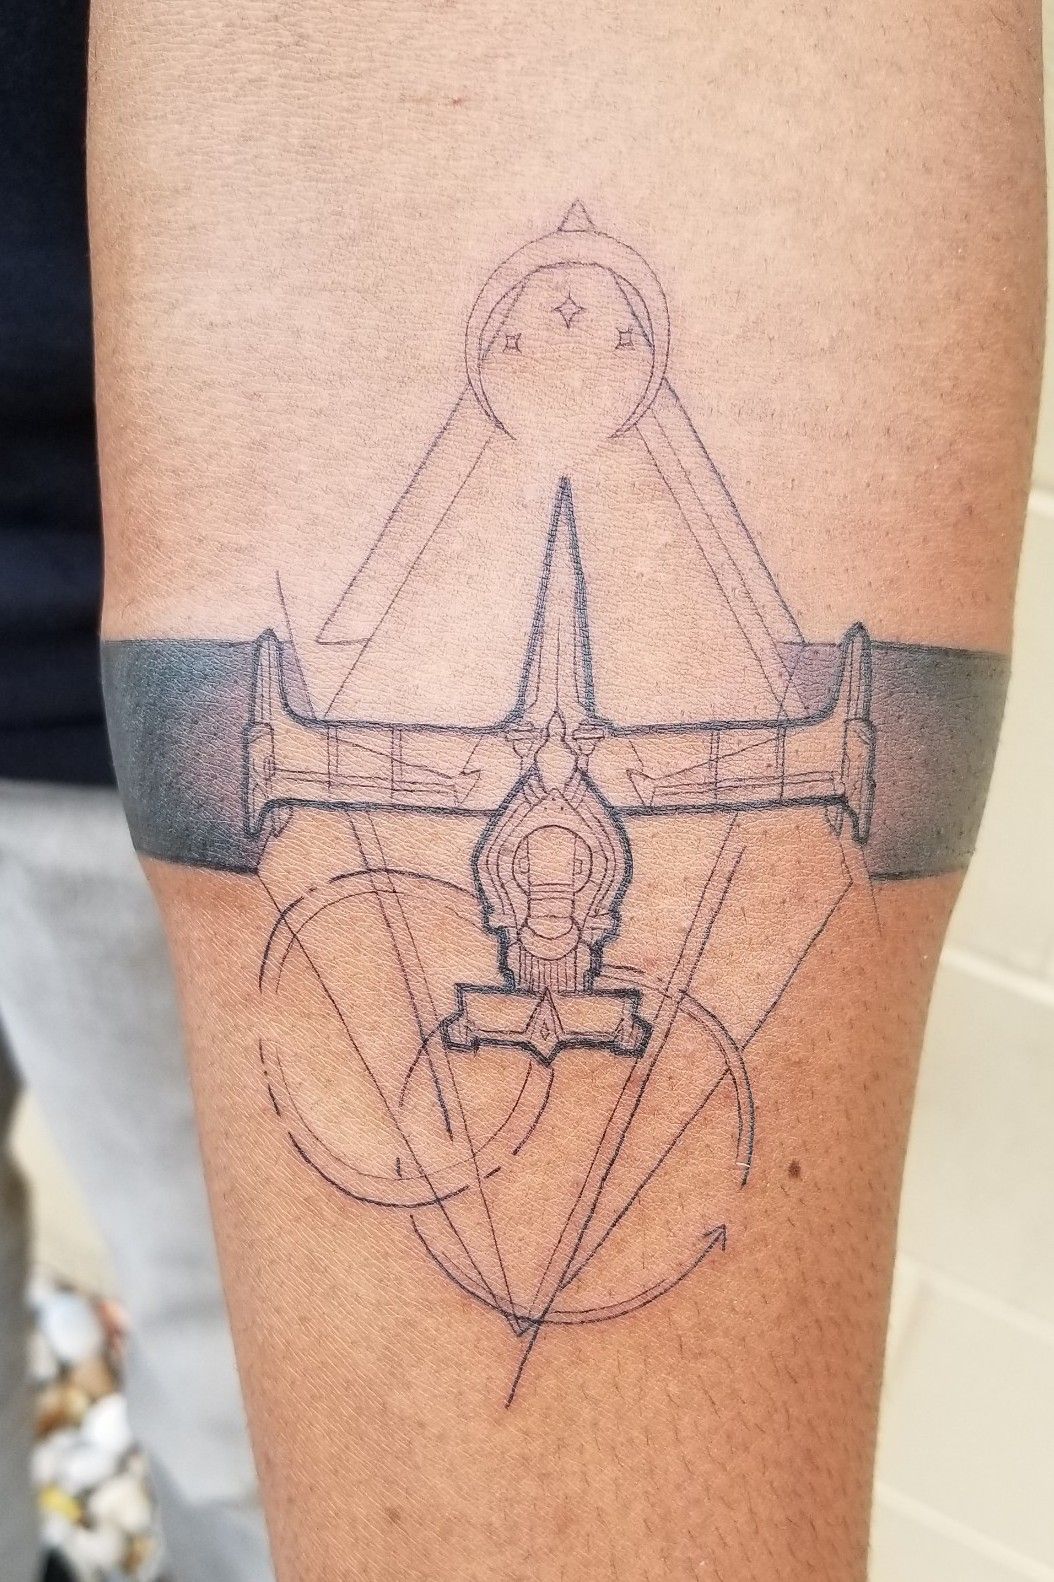 My friend took his own life we shared a love for Cowboy Bebop So I got  the swordfish tattooed on me to honor his memory  rcowboybebop